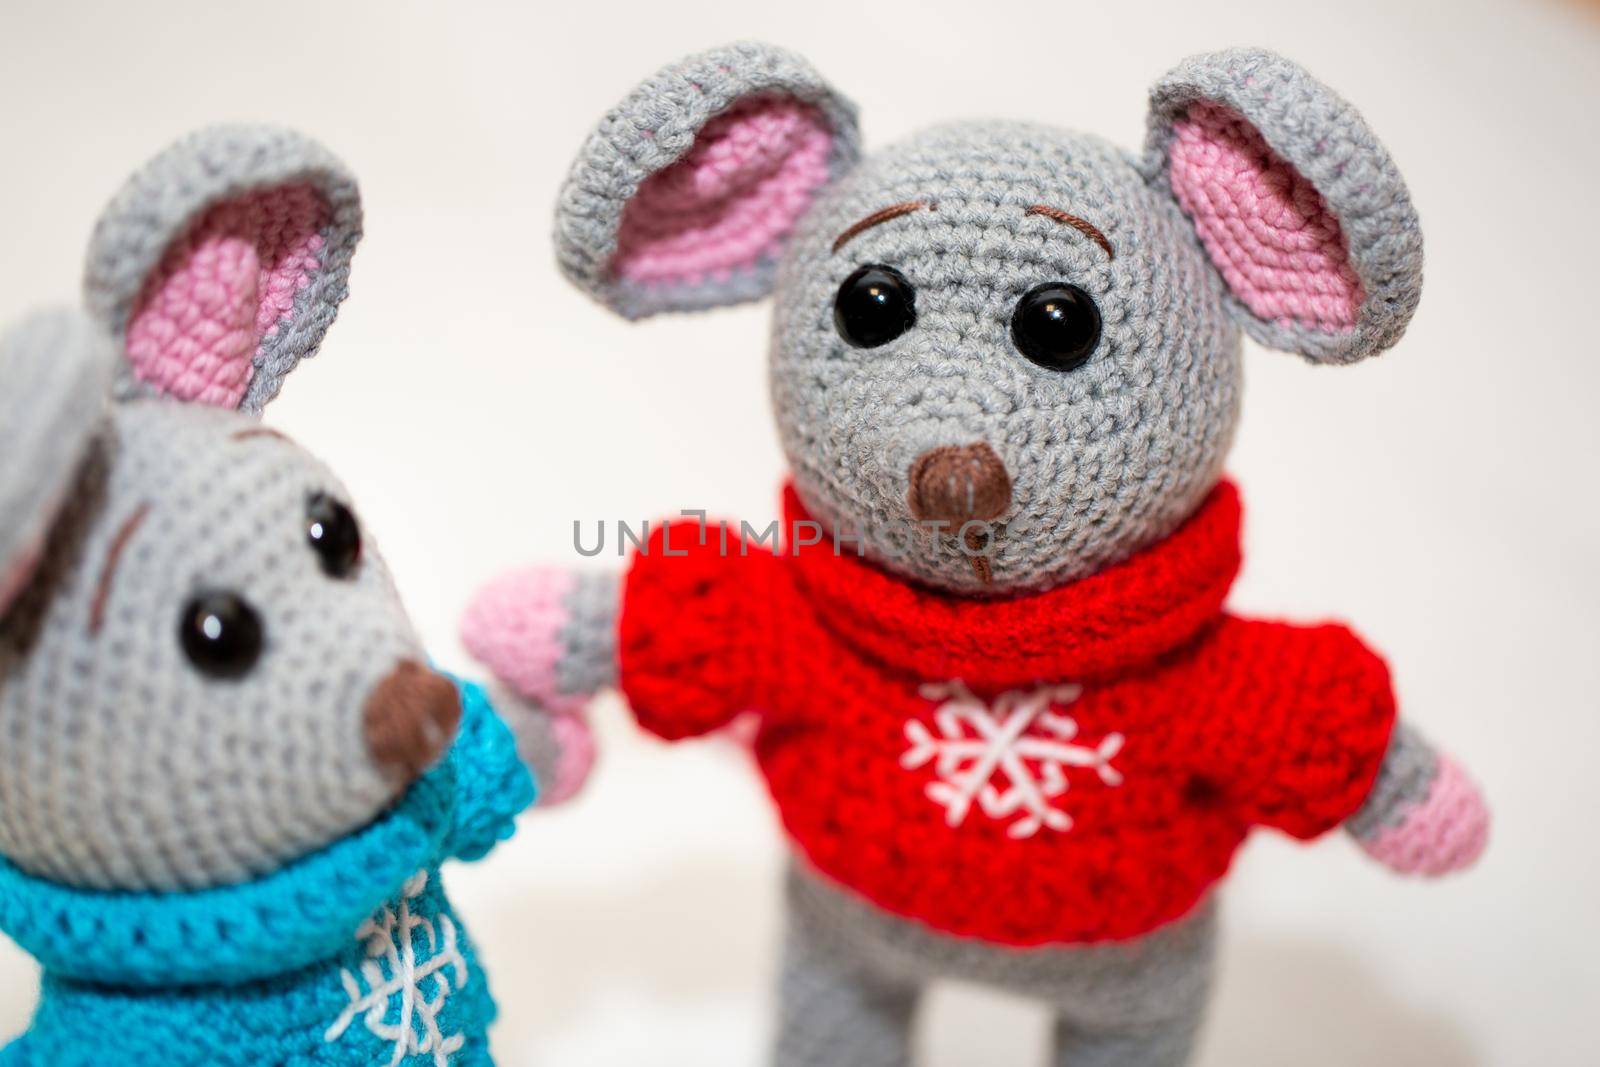 A knitted mouse. A soft toy as a symbol of the New Year.